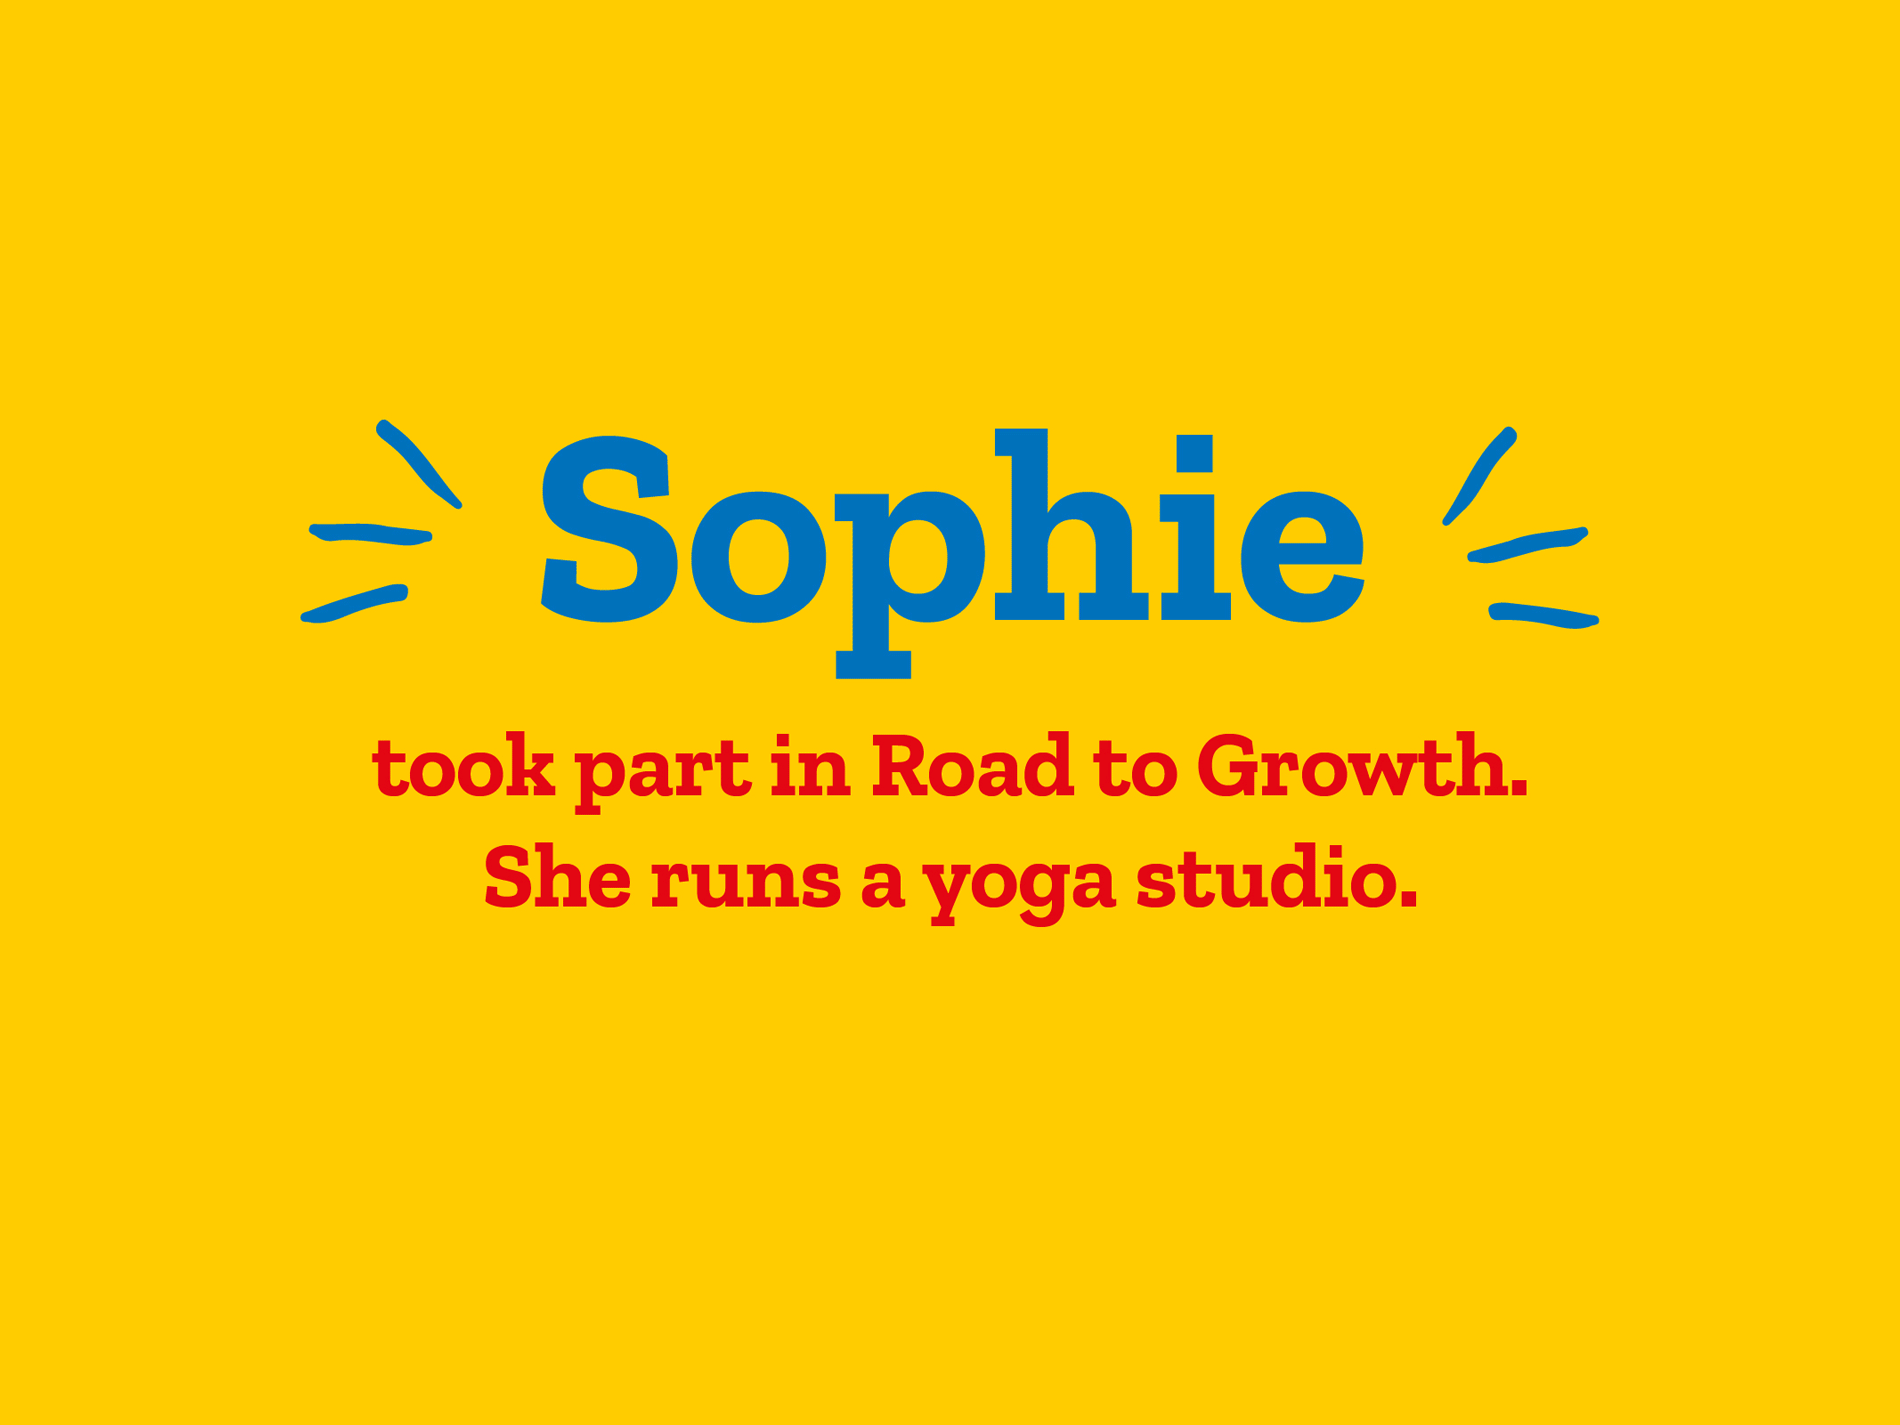 Sophie took part in our Road to Growth programme.